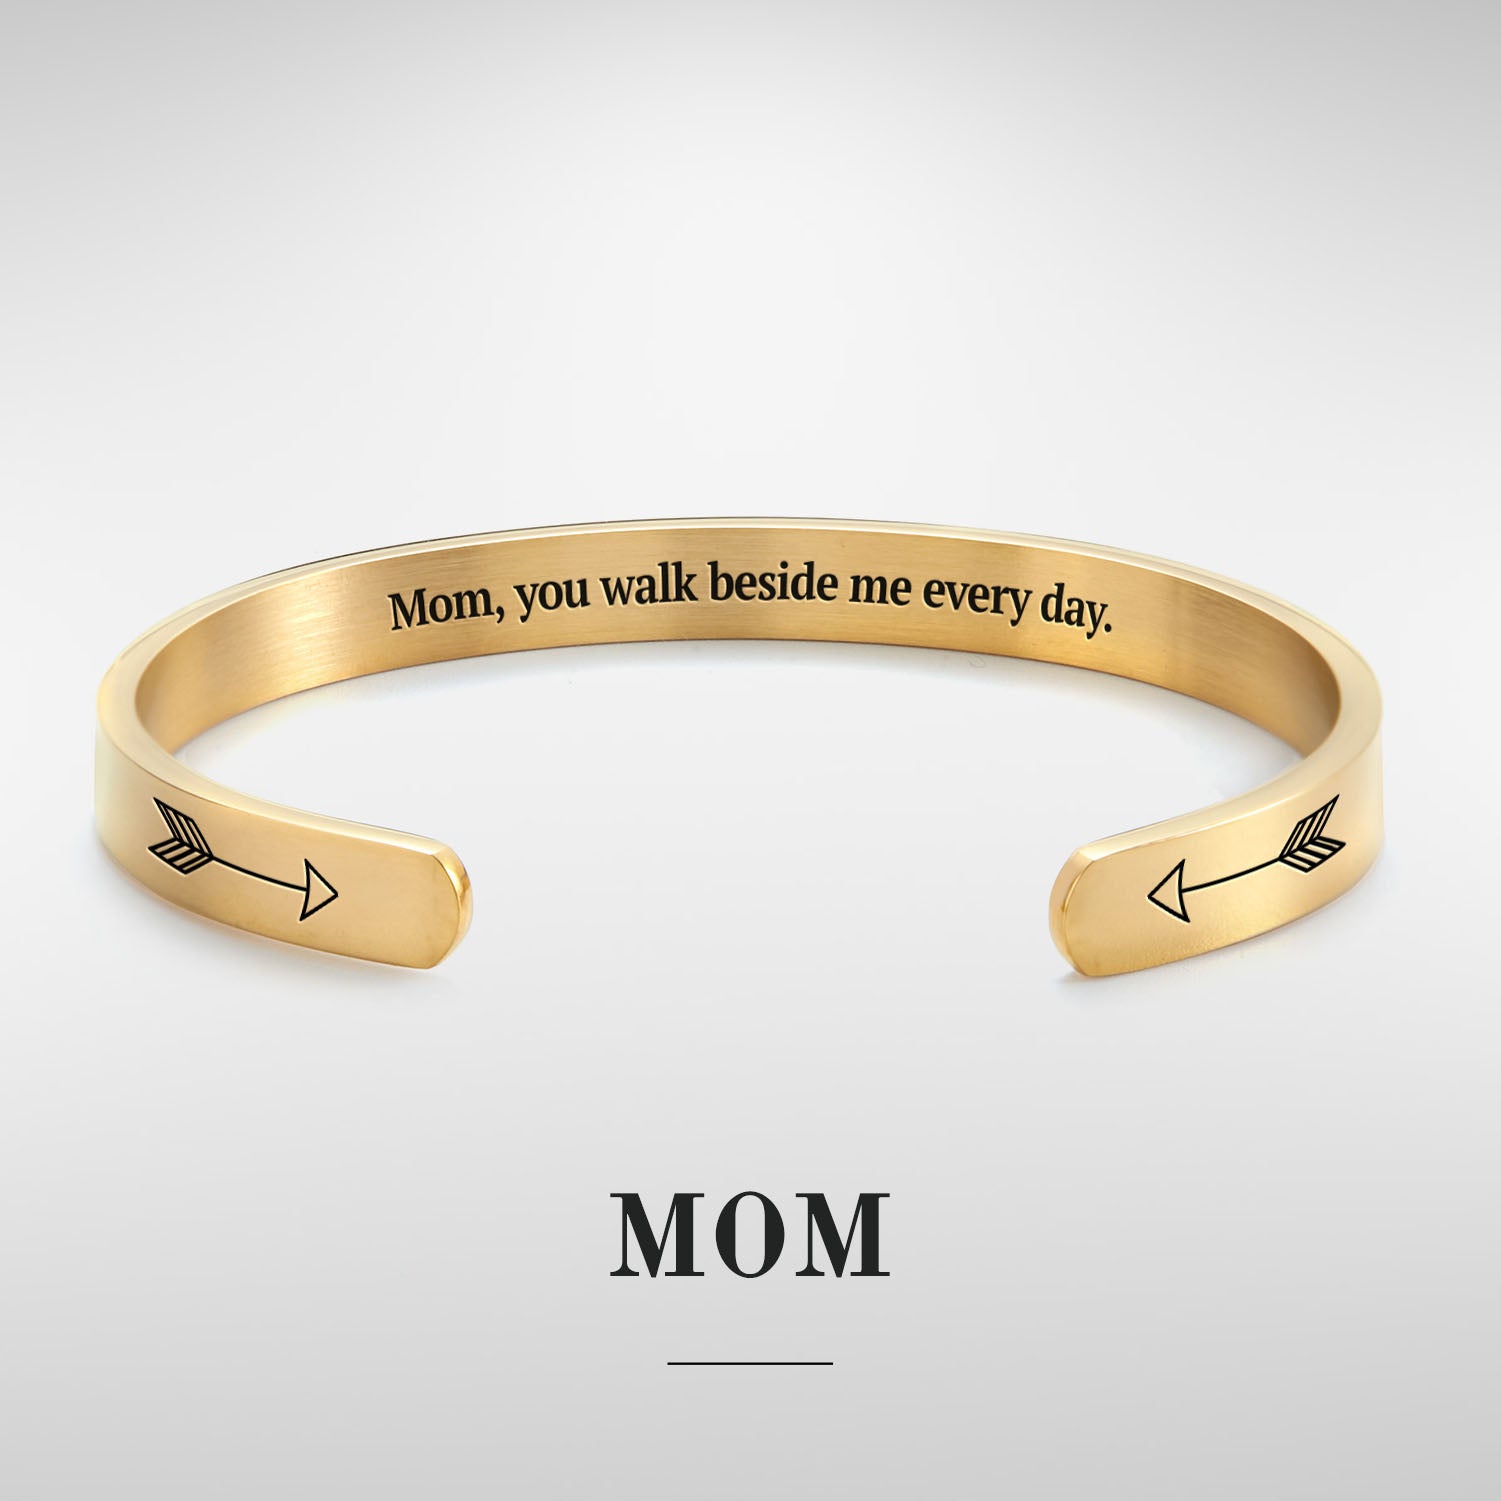 Mom, you walk beside me every day bracelet with gold plating